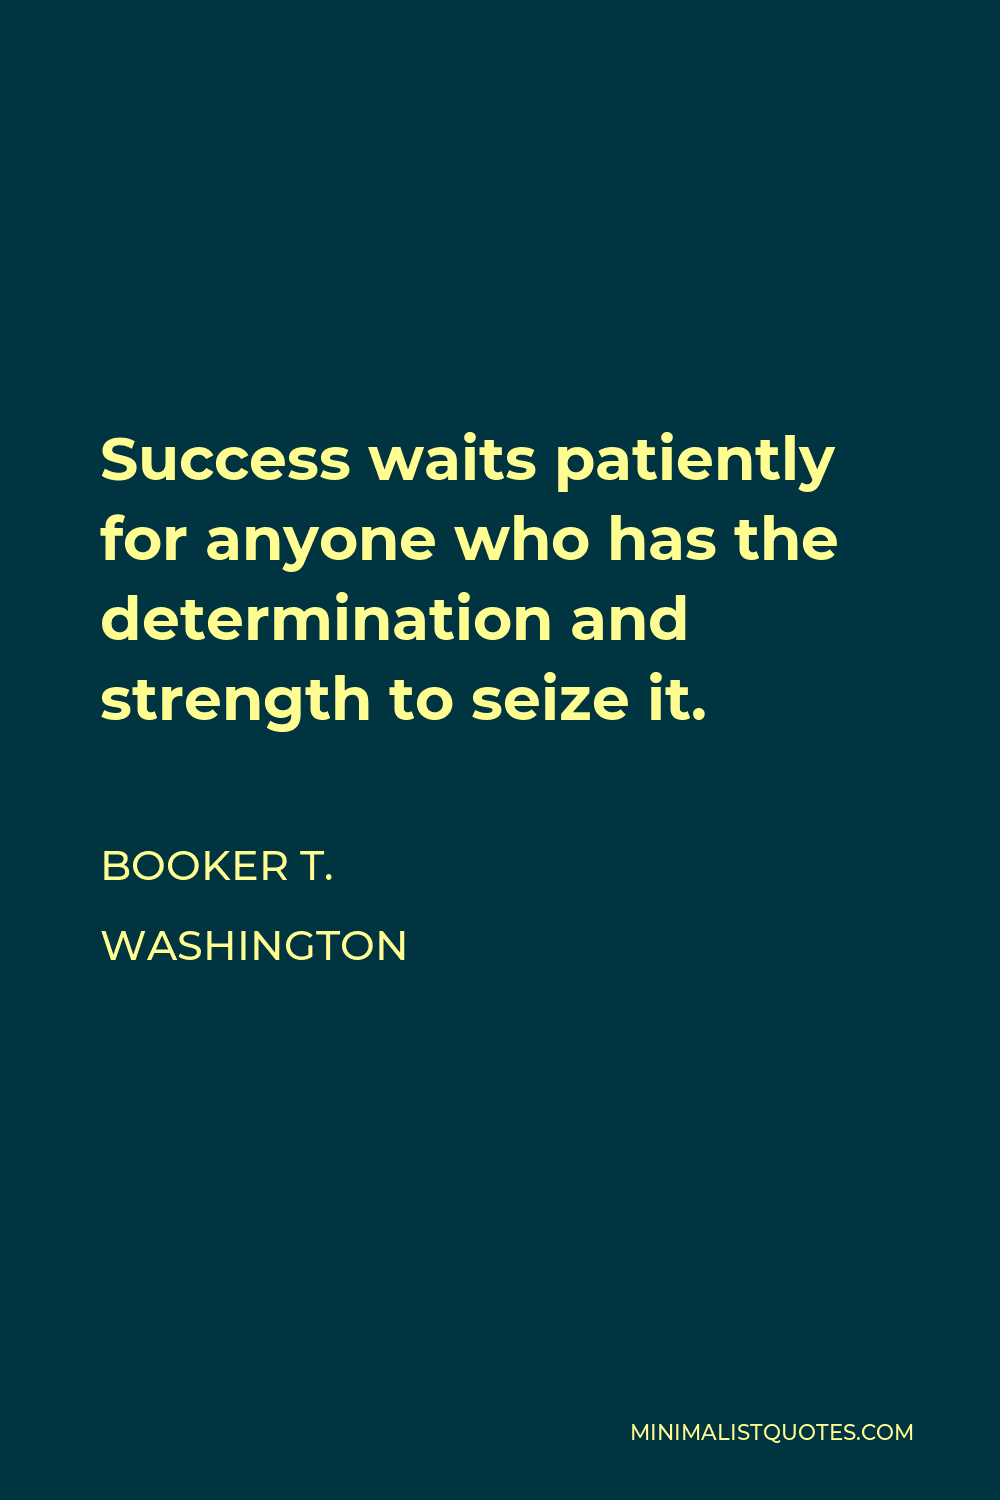 Booker T. Washington Quote - Success waits patiently for anyone who has the determination and strength to seize it.